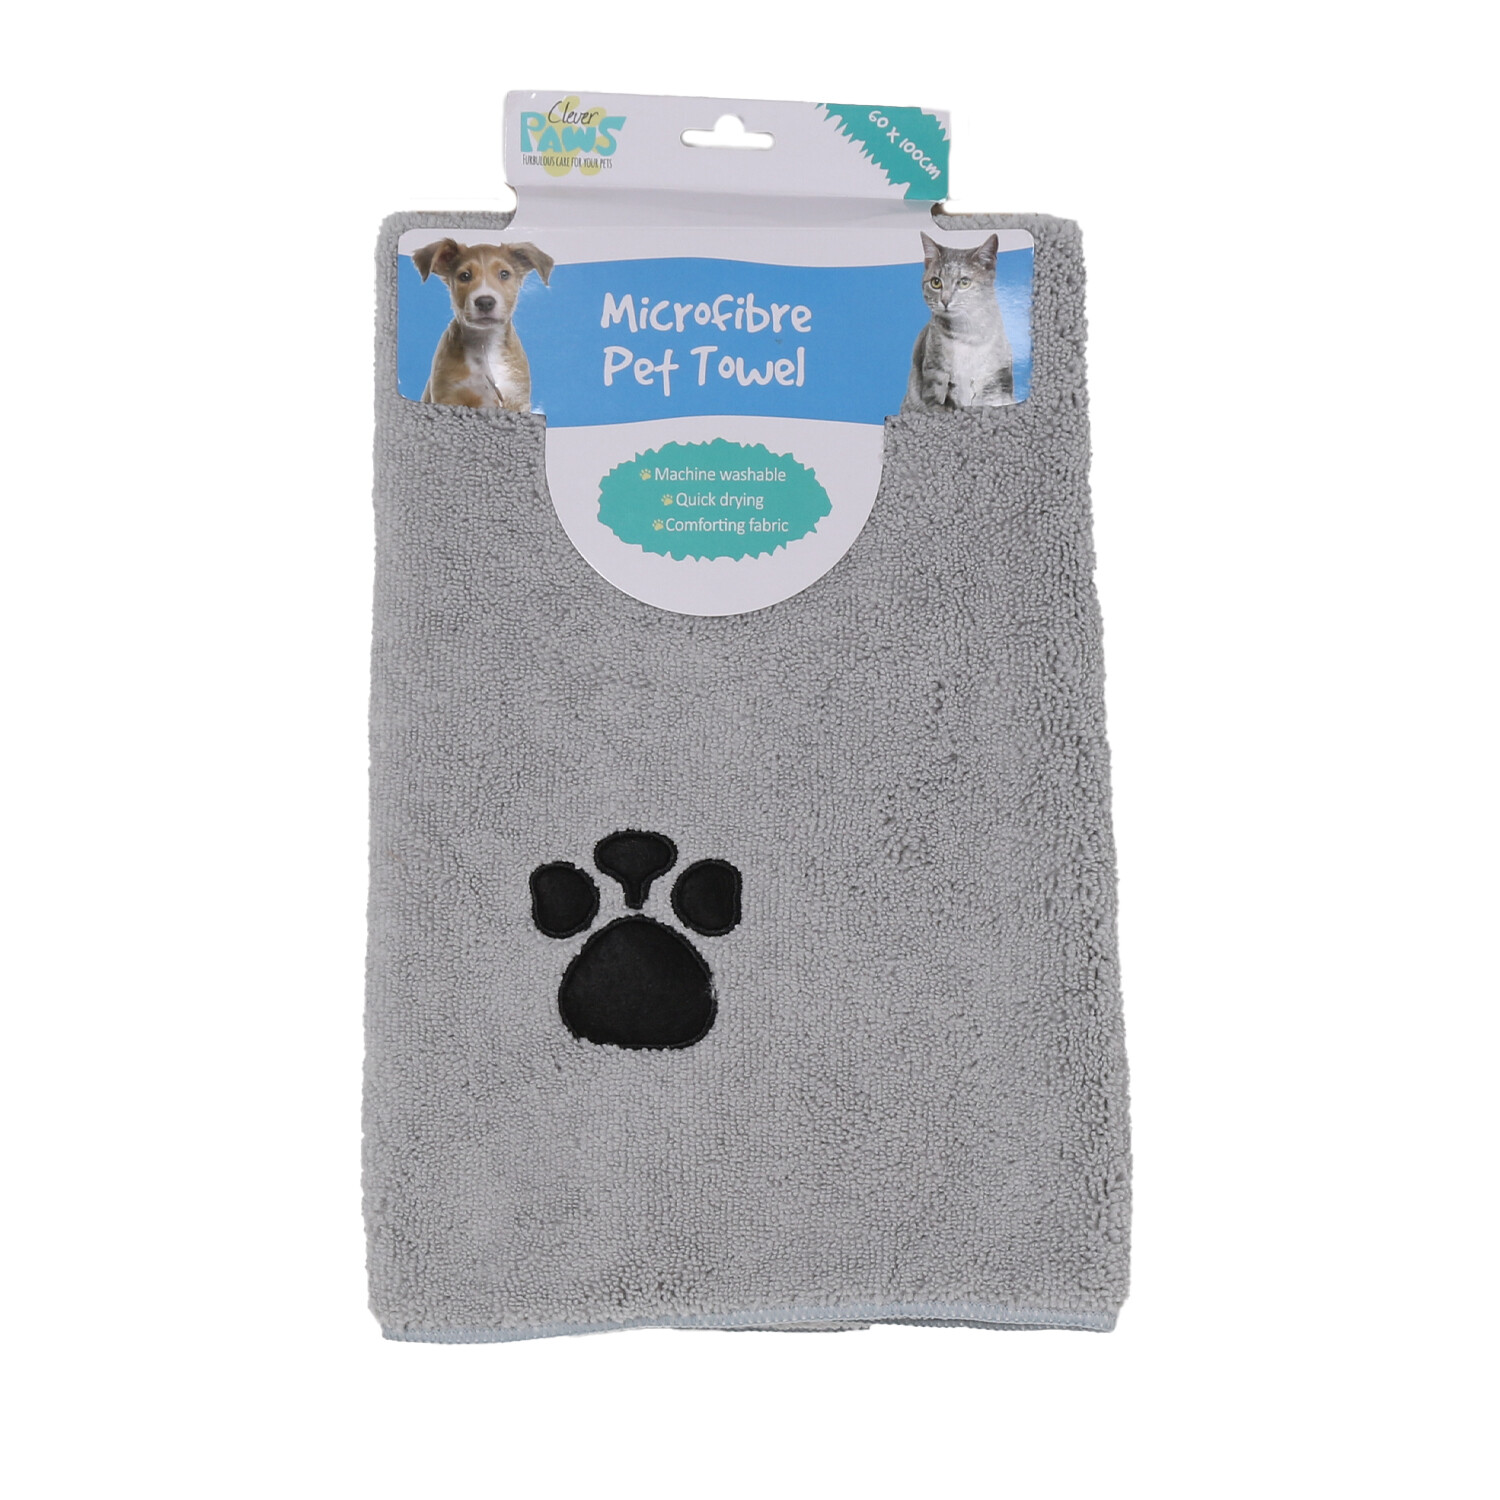 Single Clever Paws Microfibre Pet Towel in Assorted styles Image 3